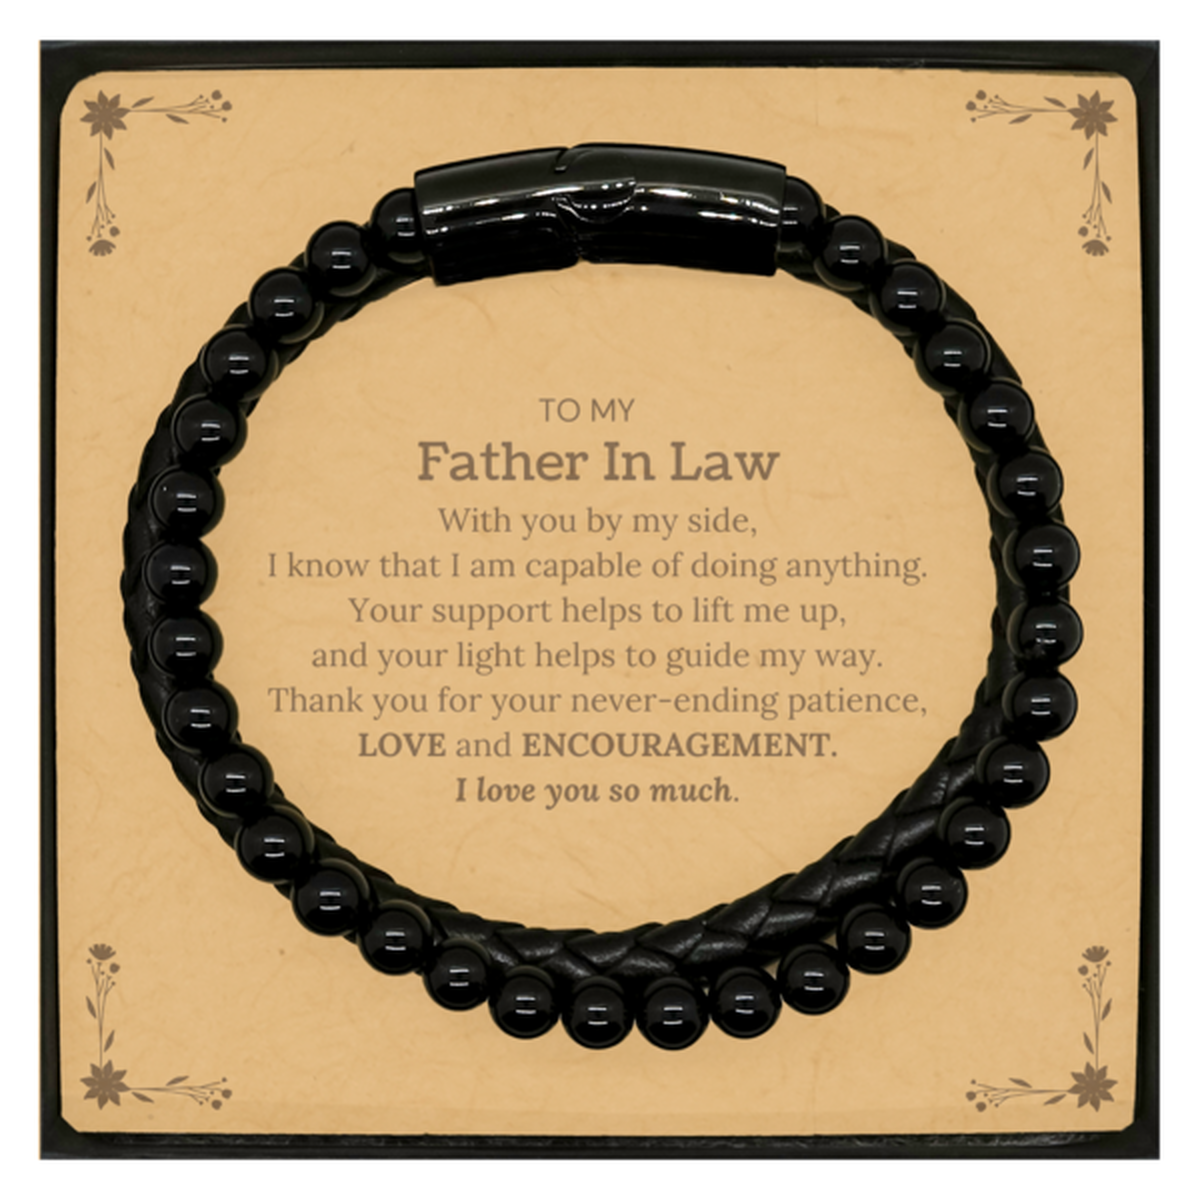 Appreciation Father In Law Stone Leather Bracelets Gifts, To My Father In Law Birthday Christmas Wedding Keepsake Gifts for Father In Law With you by my side, I know that I am capable of doing anything. I love you so much